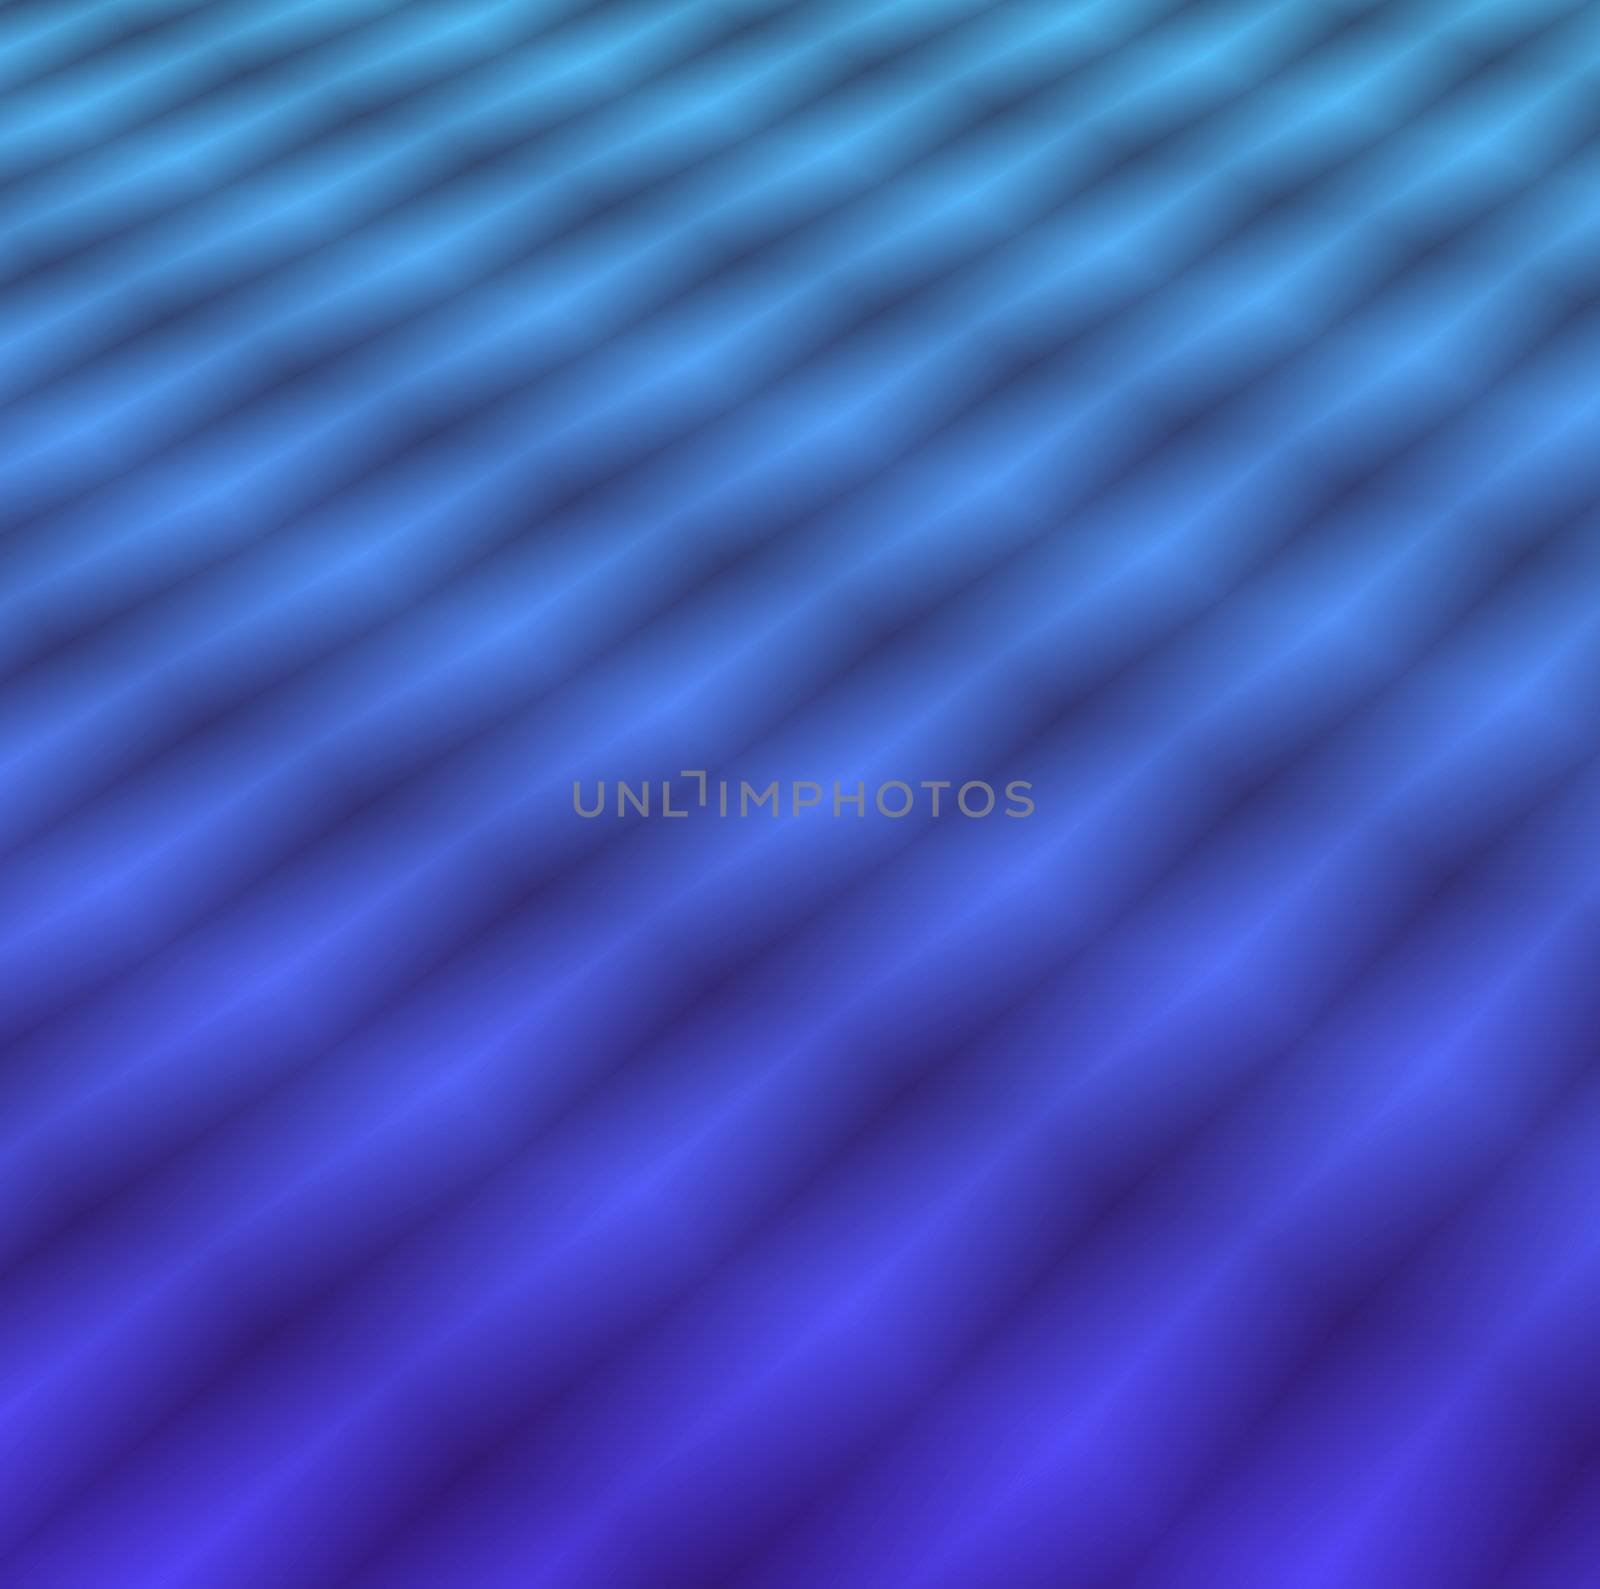 colorful blue wave abstract background nice wallpaper for a web site